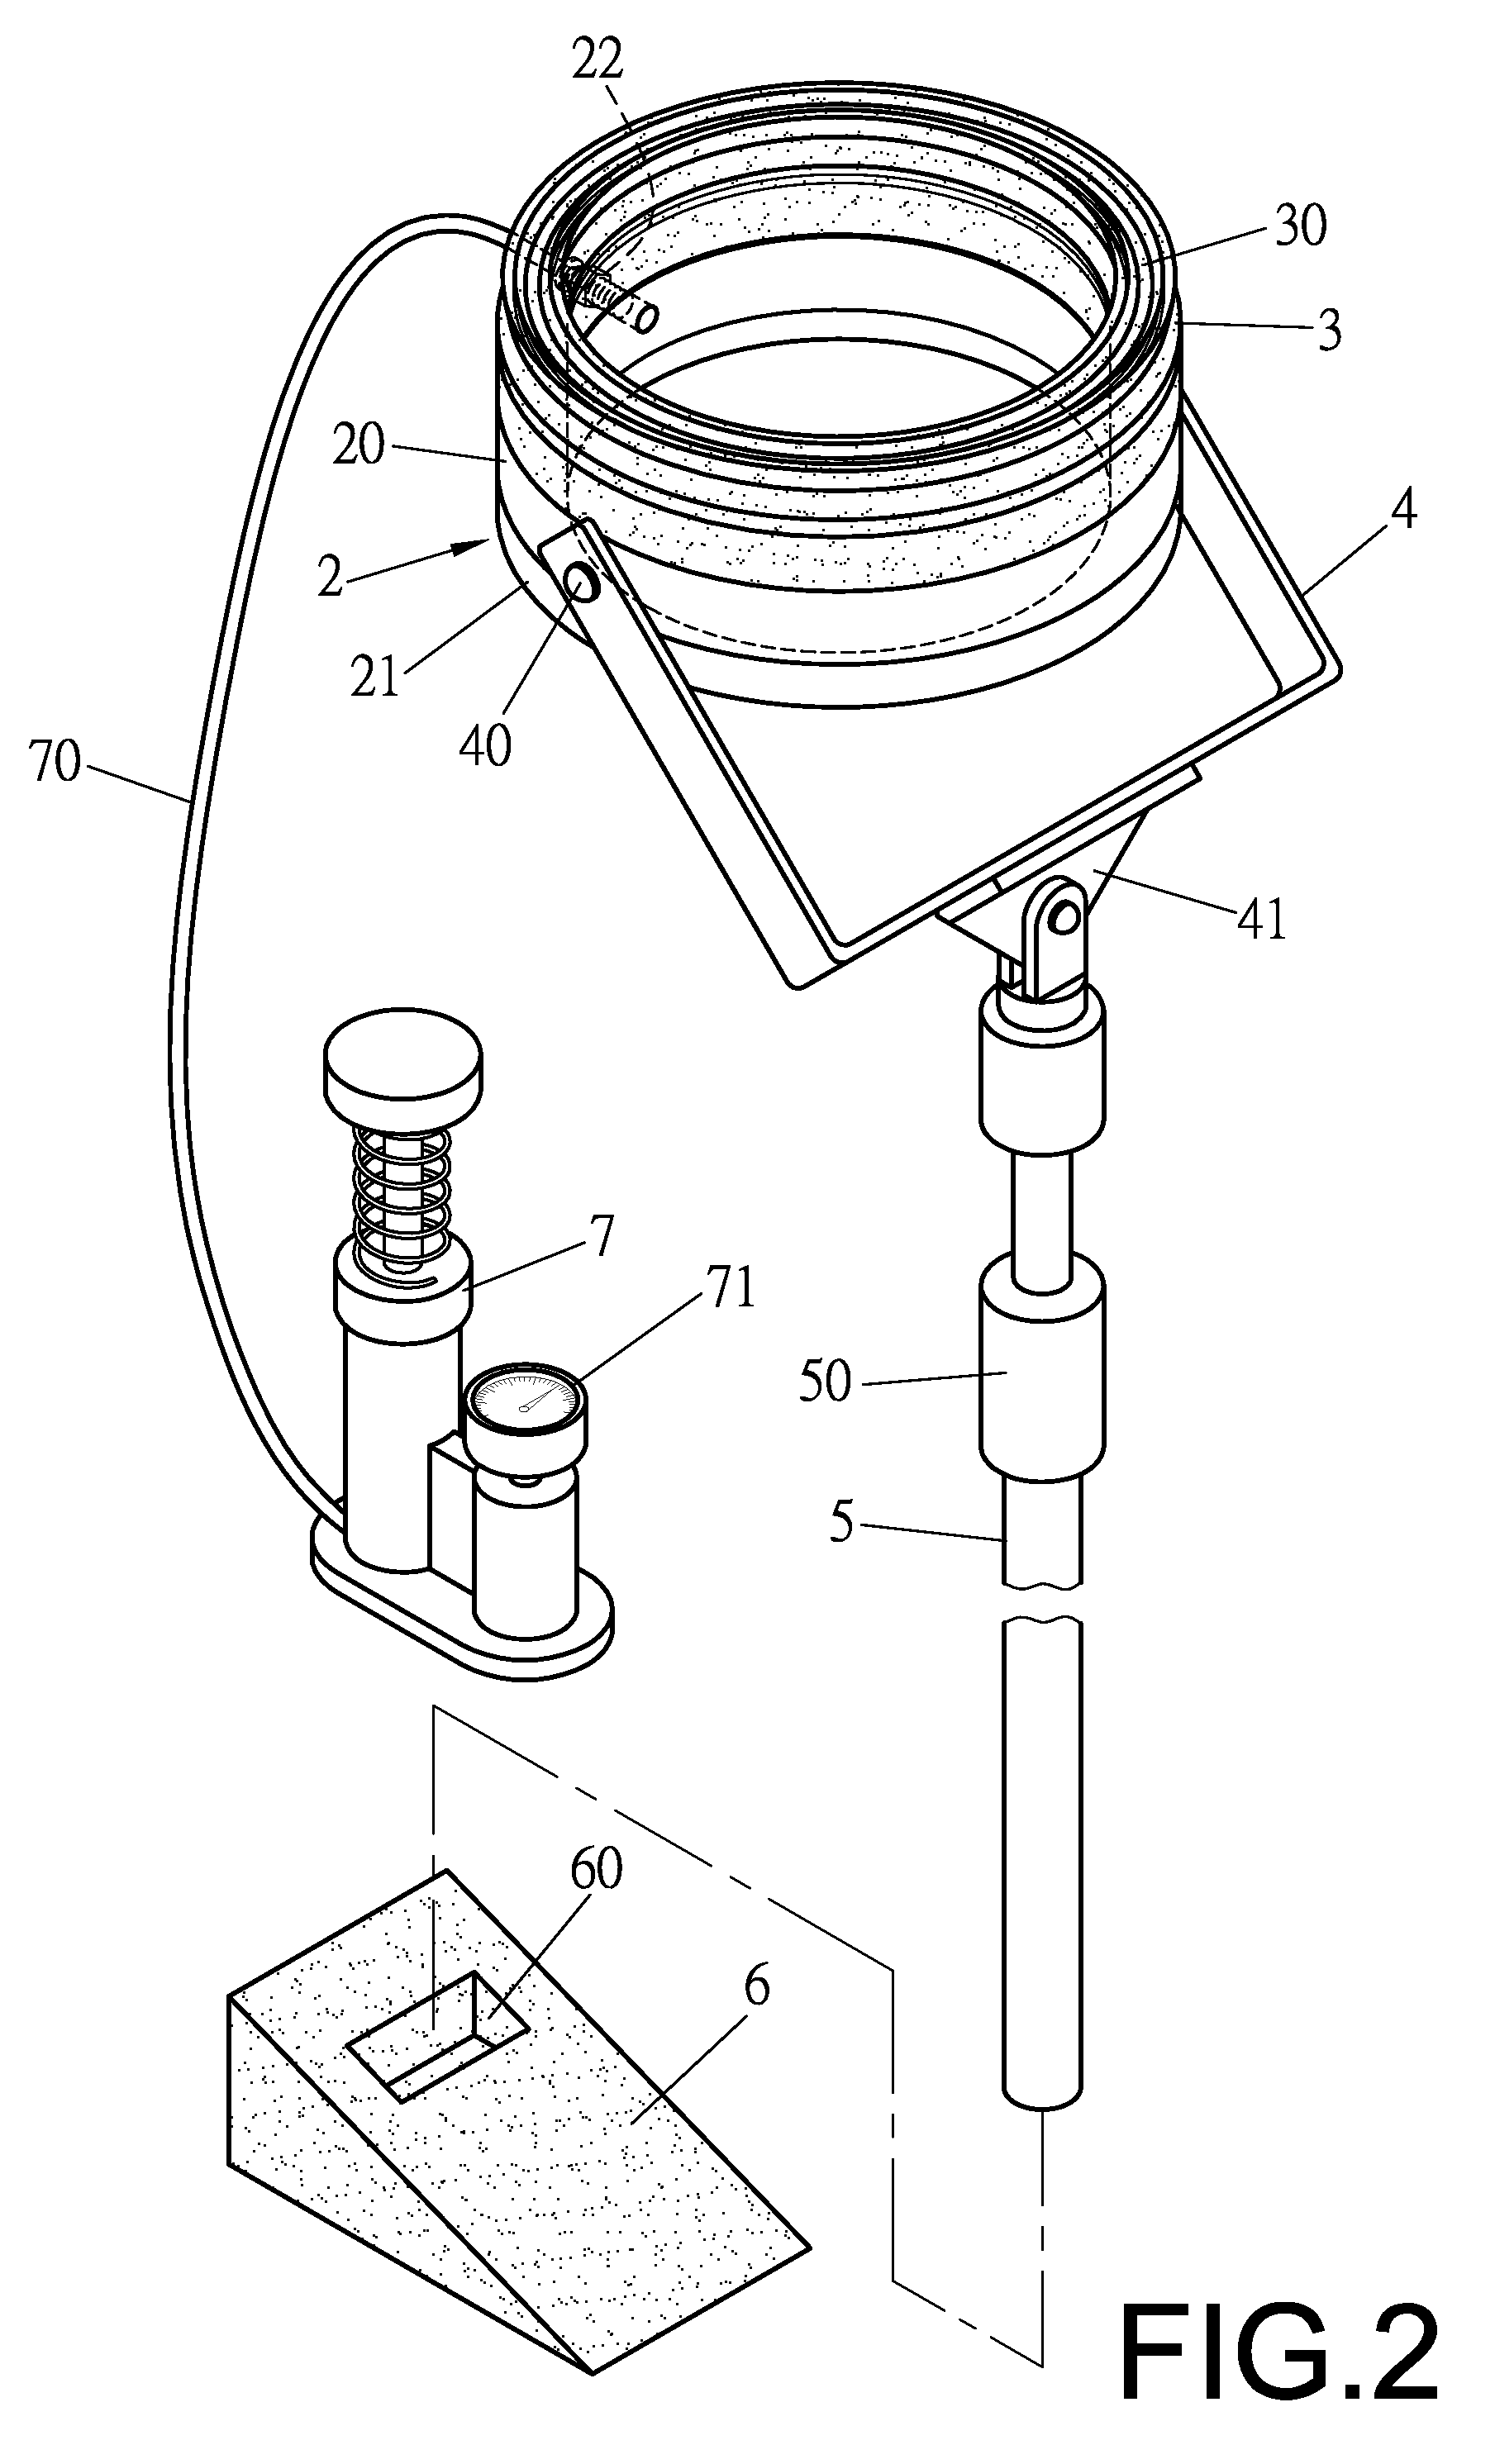 Testing apparatus for hydrostatic interlock of a lifeboat